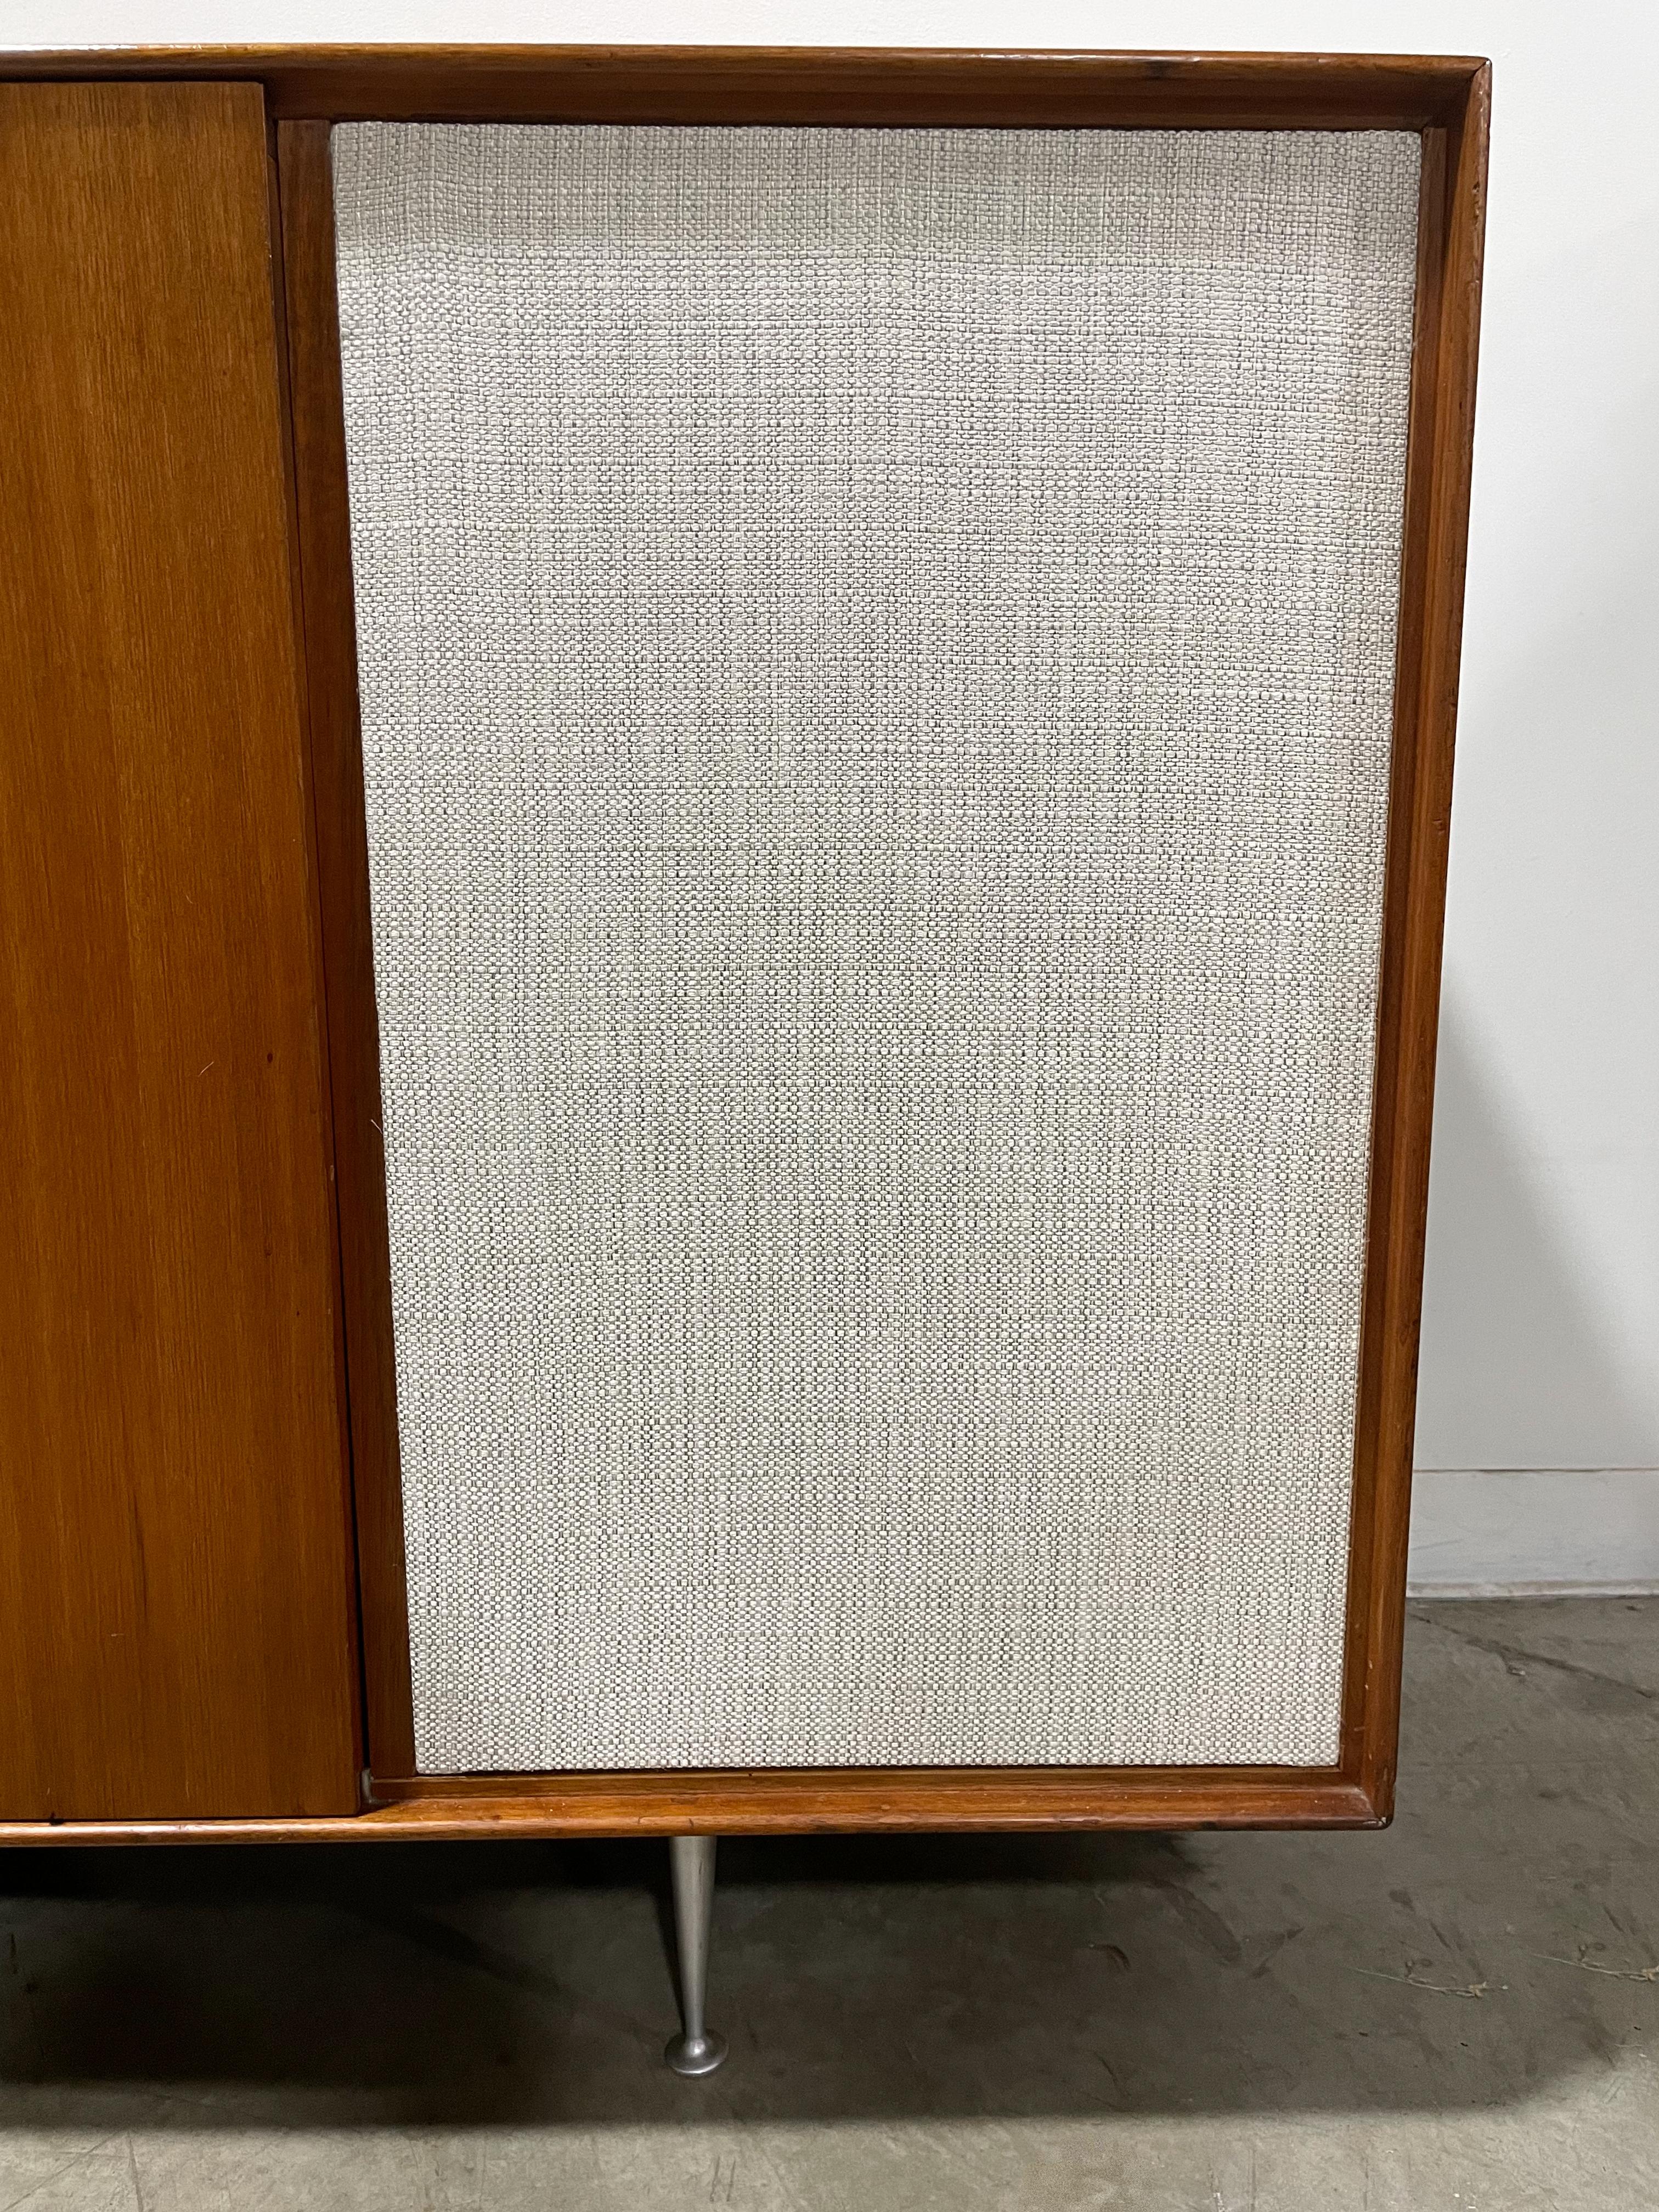 Aluminum George Nelson Thin Edge Record Player Cabinet